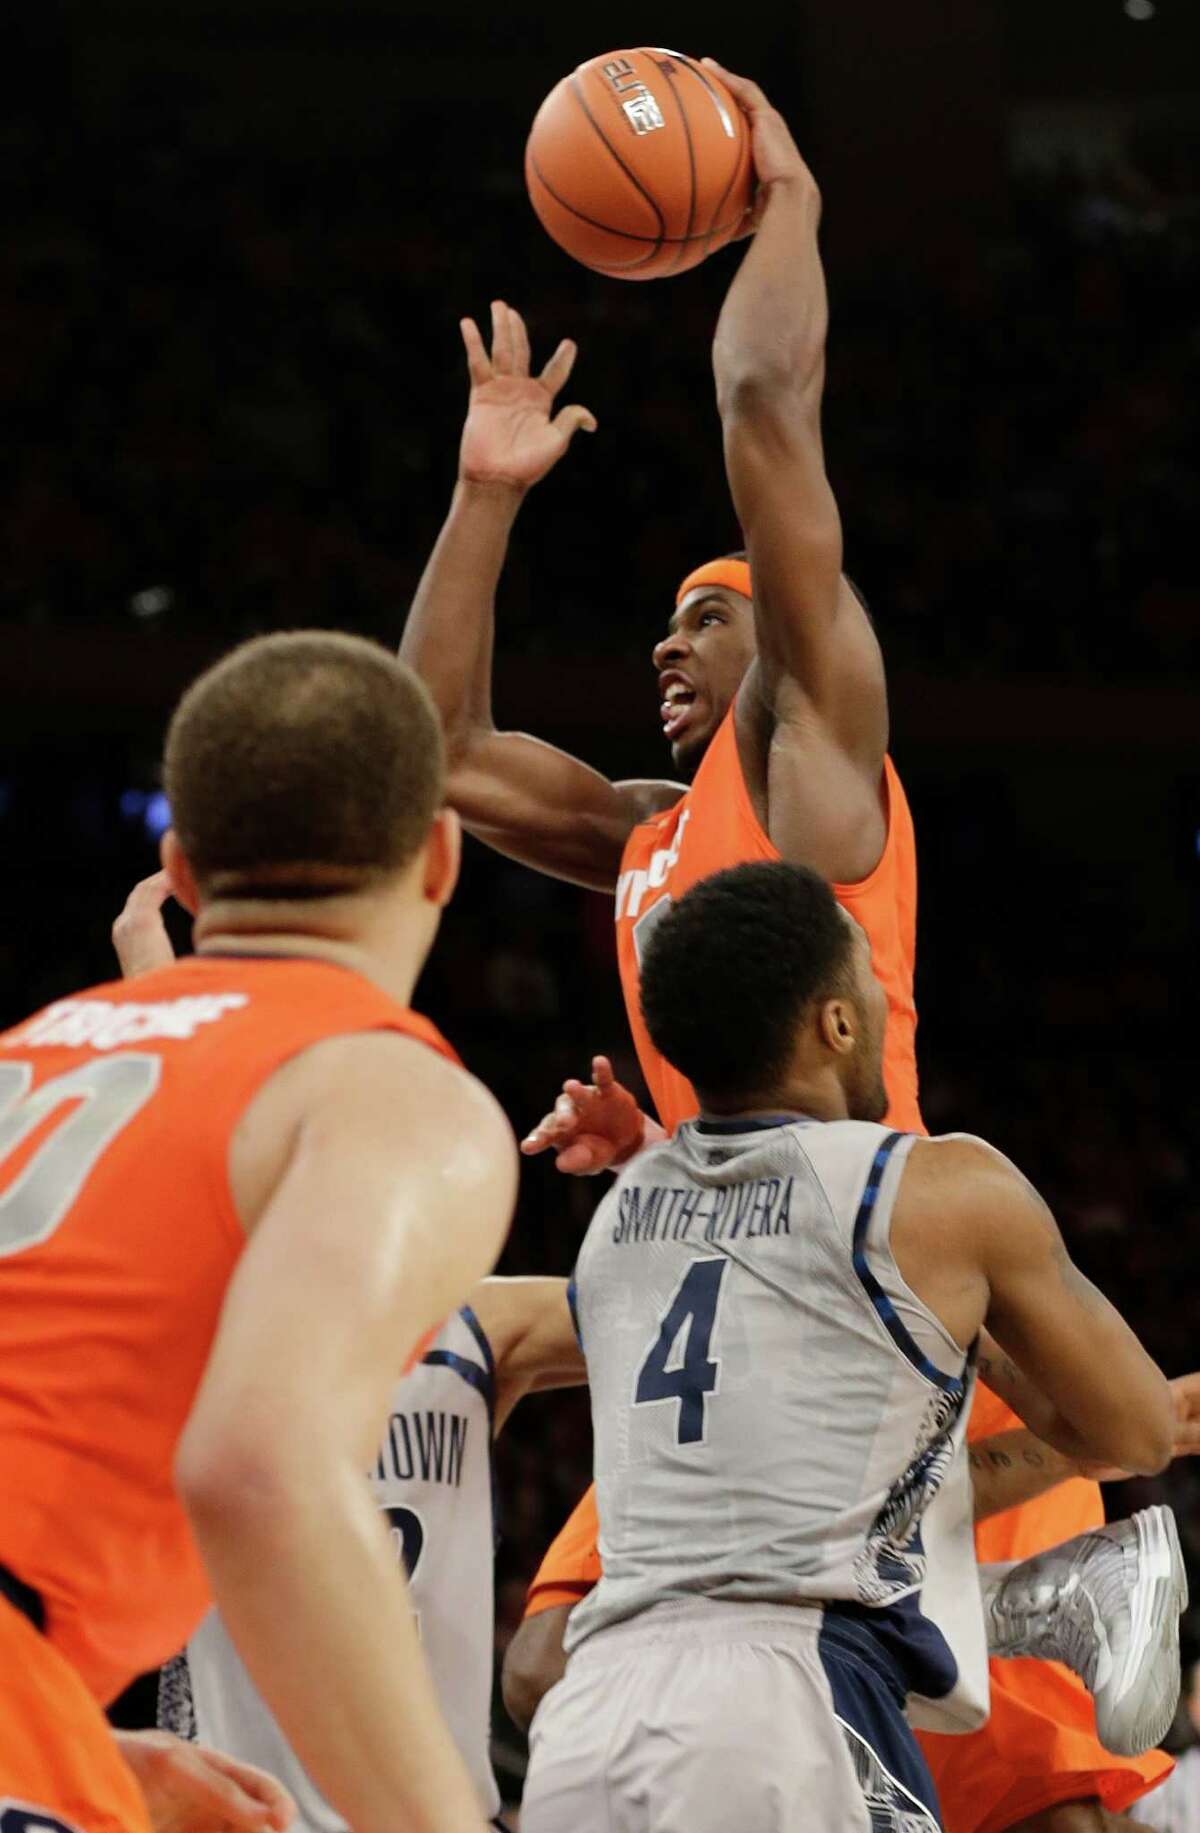 Syracuse's C.J. Fair (5) drives past Georgetown's D'Vauntes Smith-Rivera (4) during the overtime period of an NCAA college basketball game at the Big East Conference tournament Friday, March 15, 2013, in New York. Syracuse won the game 58-55. (AP Photo/Frank Franklin II)